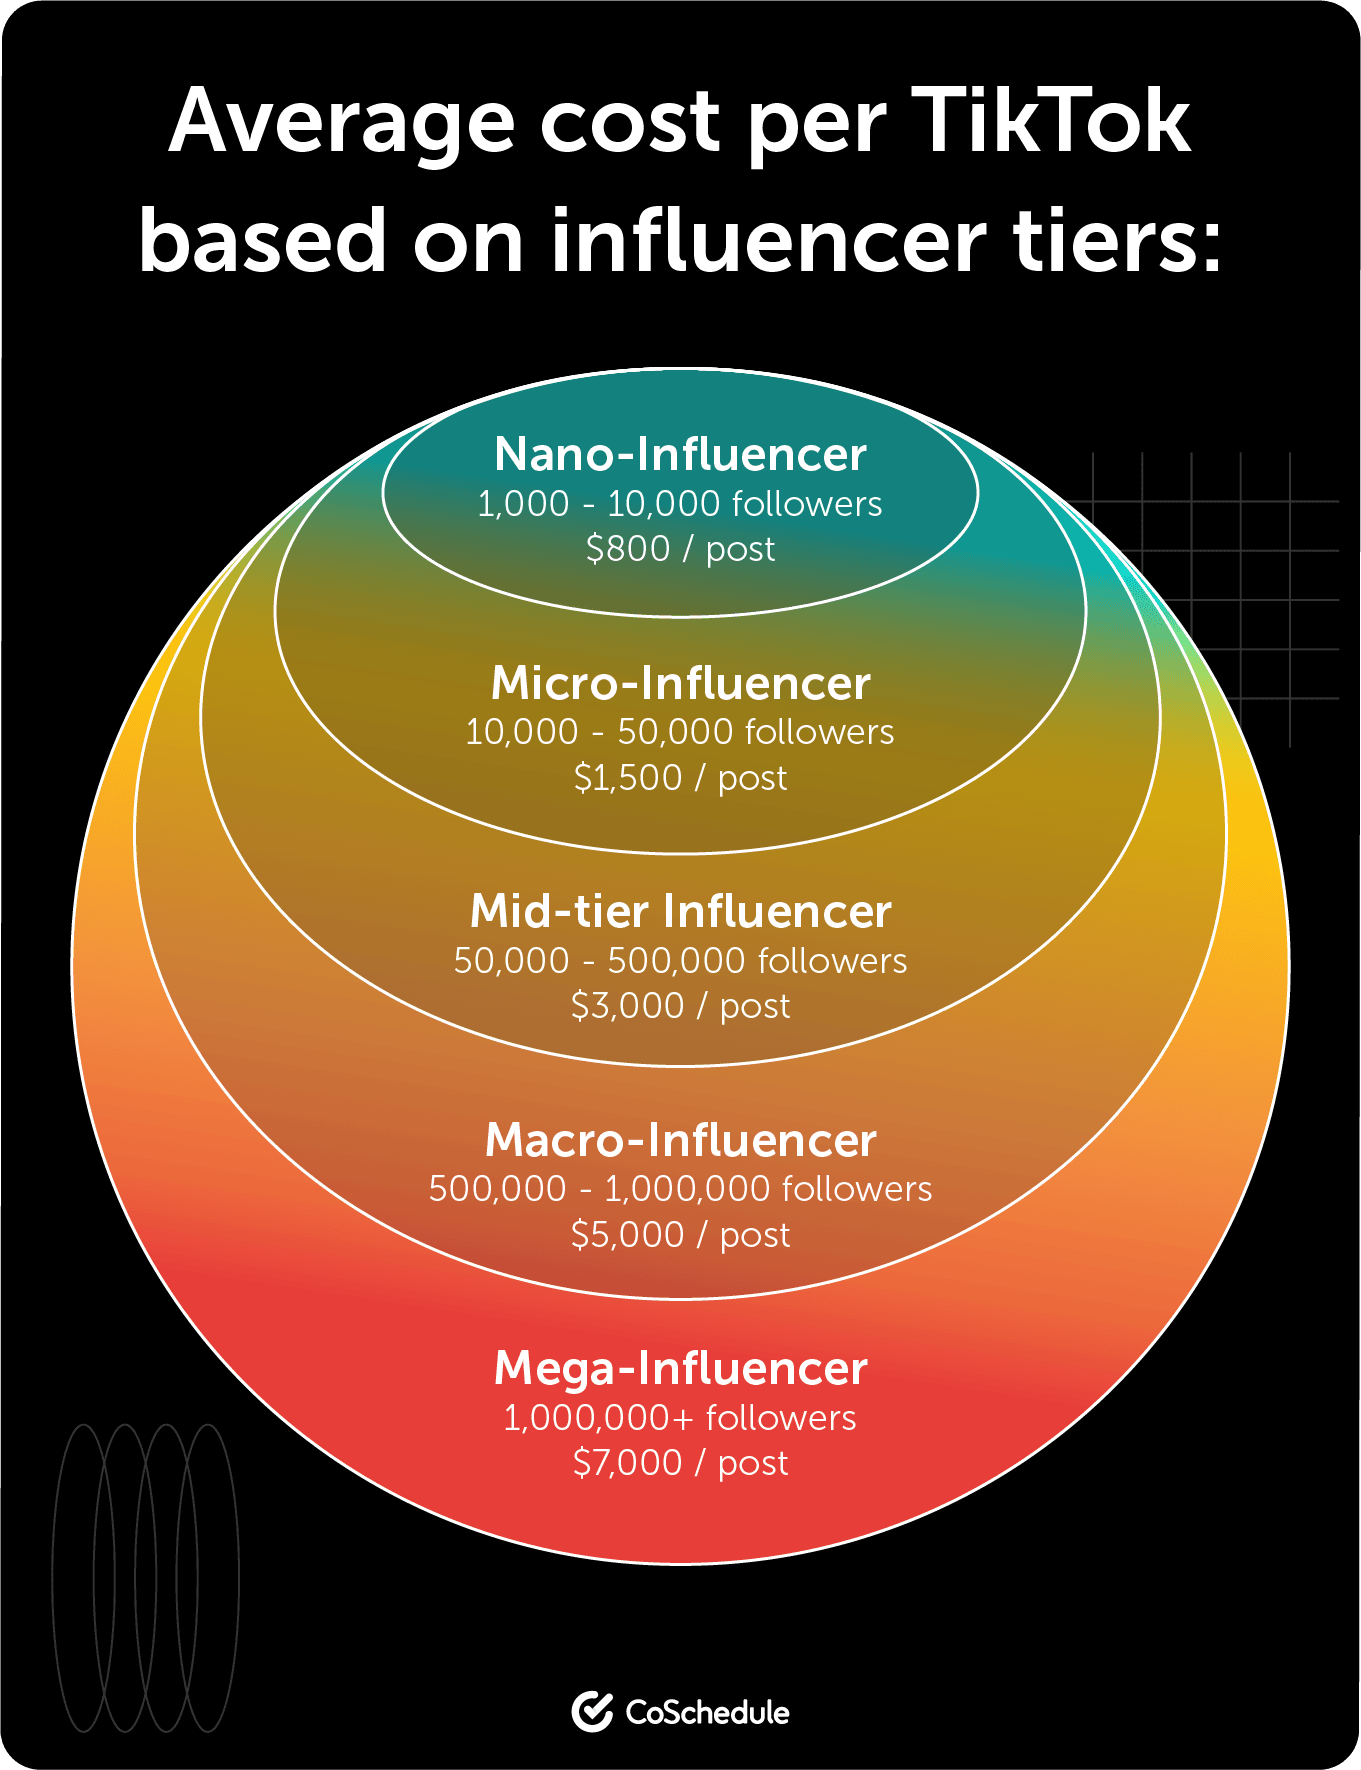 Average cost per TikTok based on influencer tiers